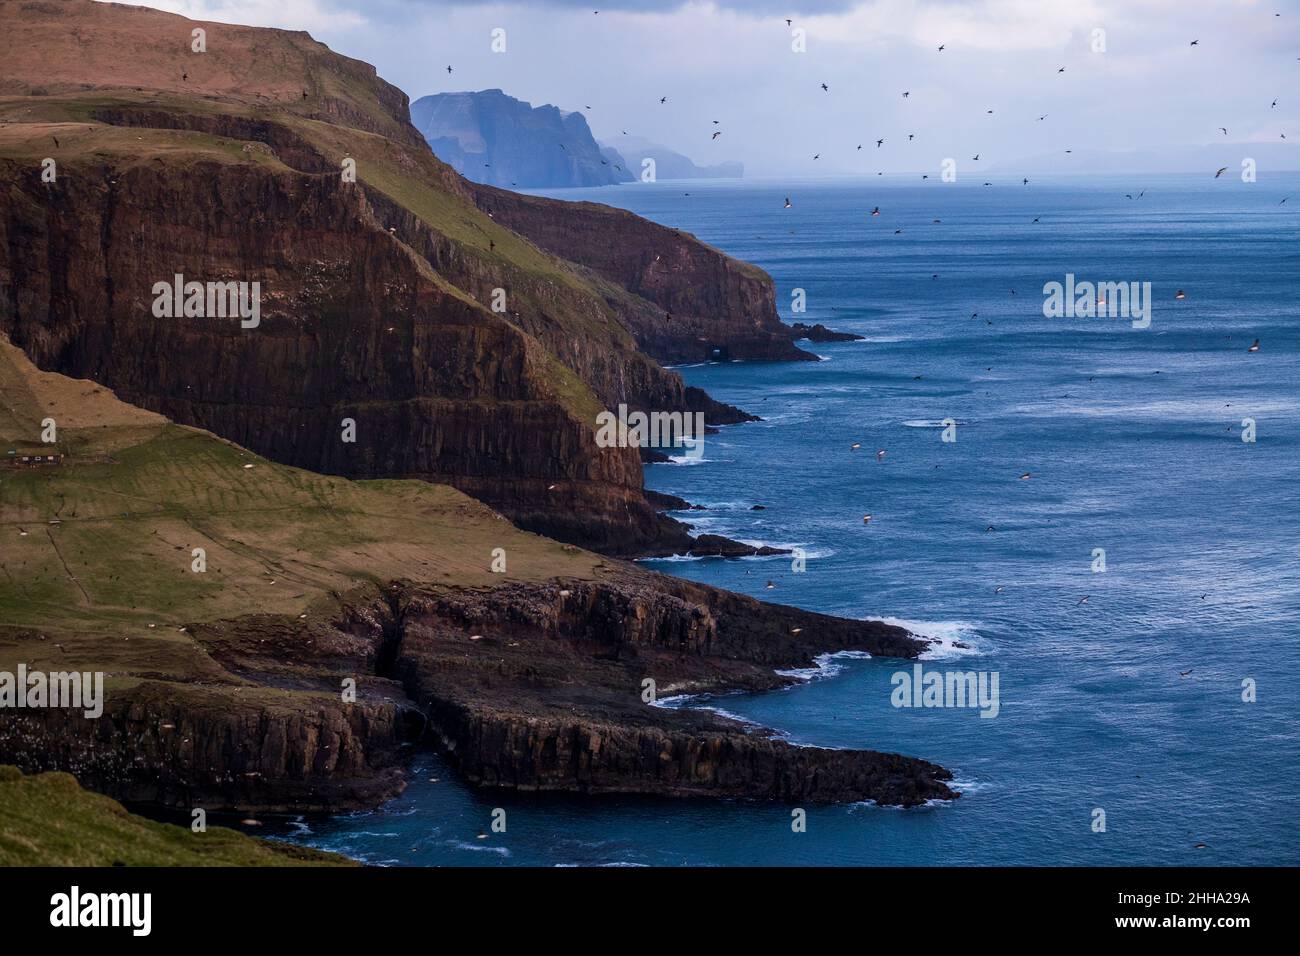 Hundreds of puffins swarm the skies over the seas, cliffs and moss green hilltops. Stock Photo